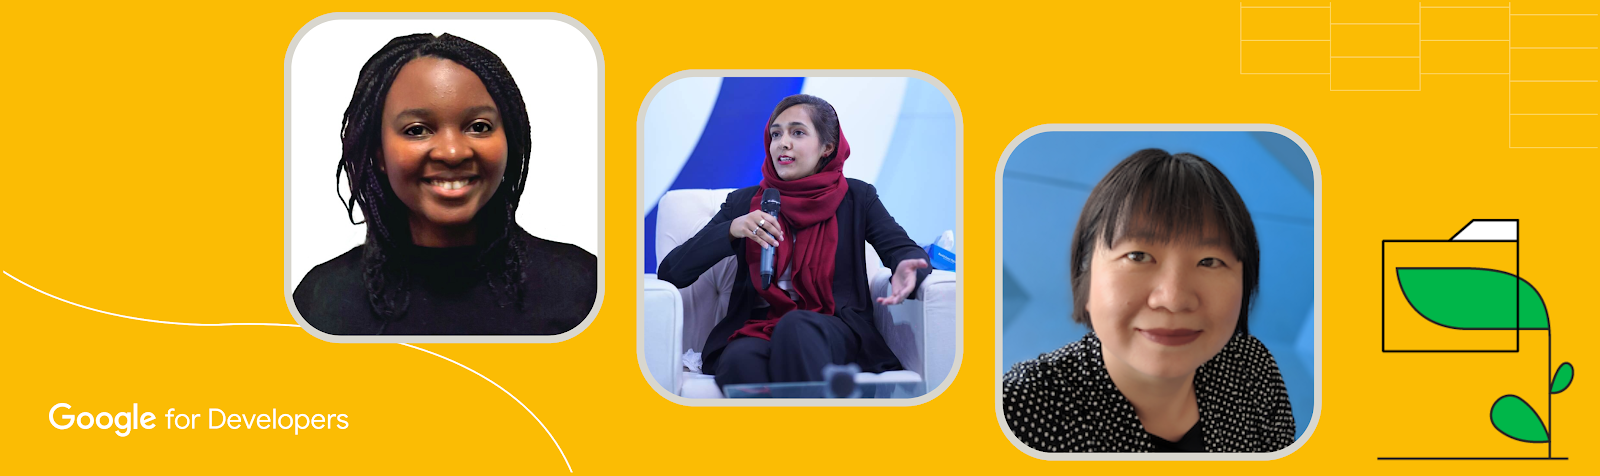 A yellow banner with three photos of women developers. The Google for Developers logo is at the bottom left.